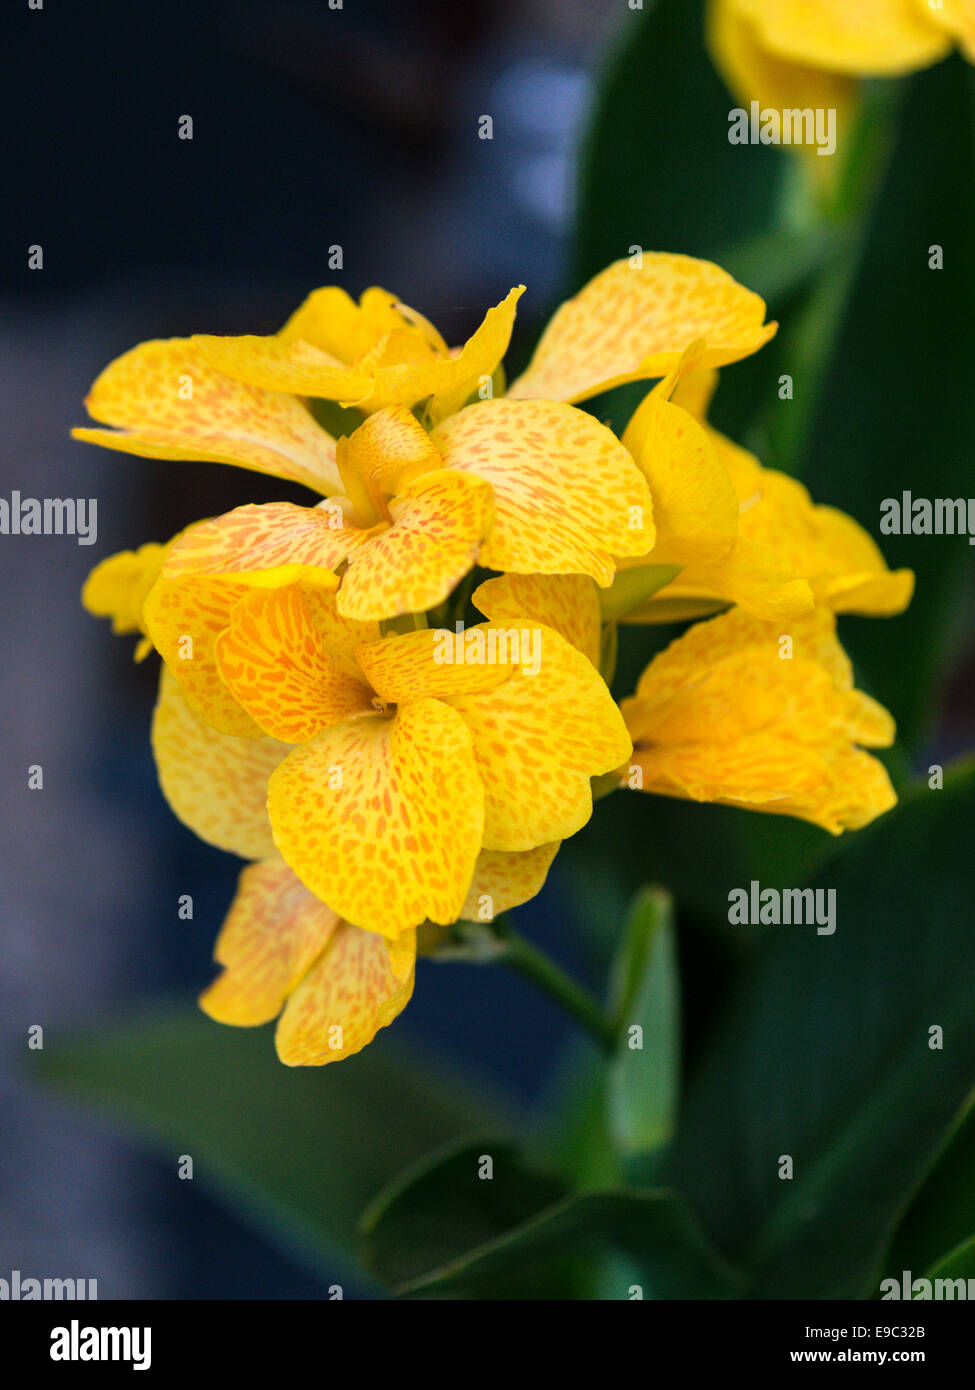 Orchid yellow with speckled petals and green foliage background. Stock Photo